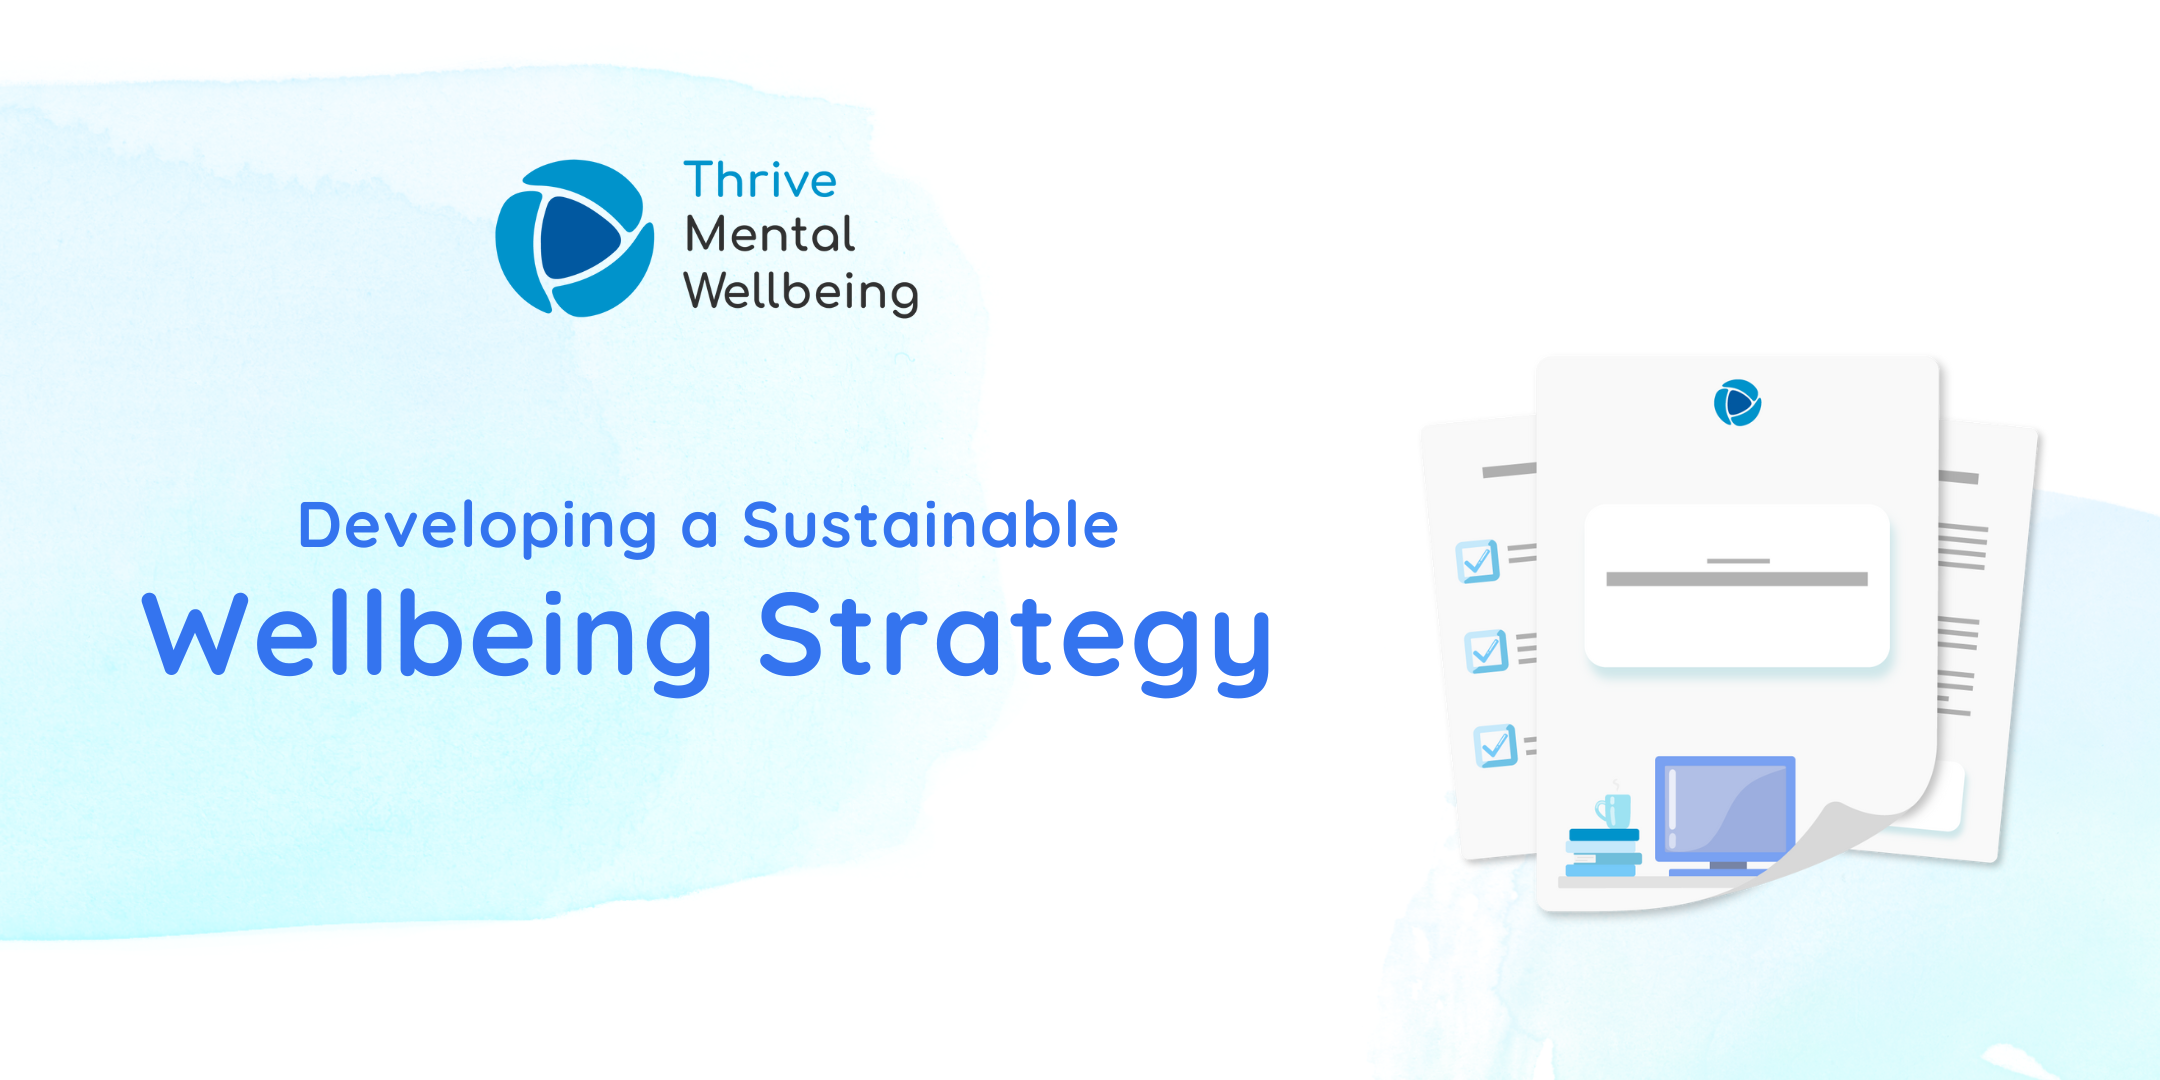 Wellbeing Strategy Guide Download